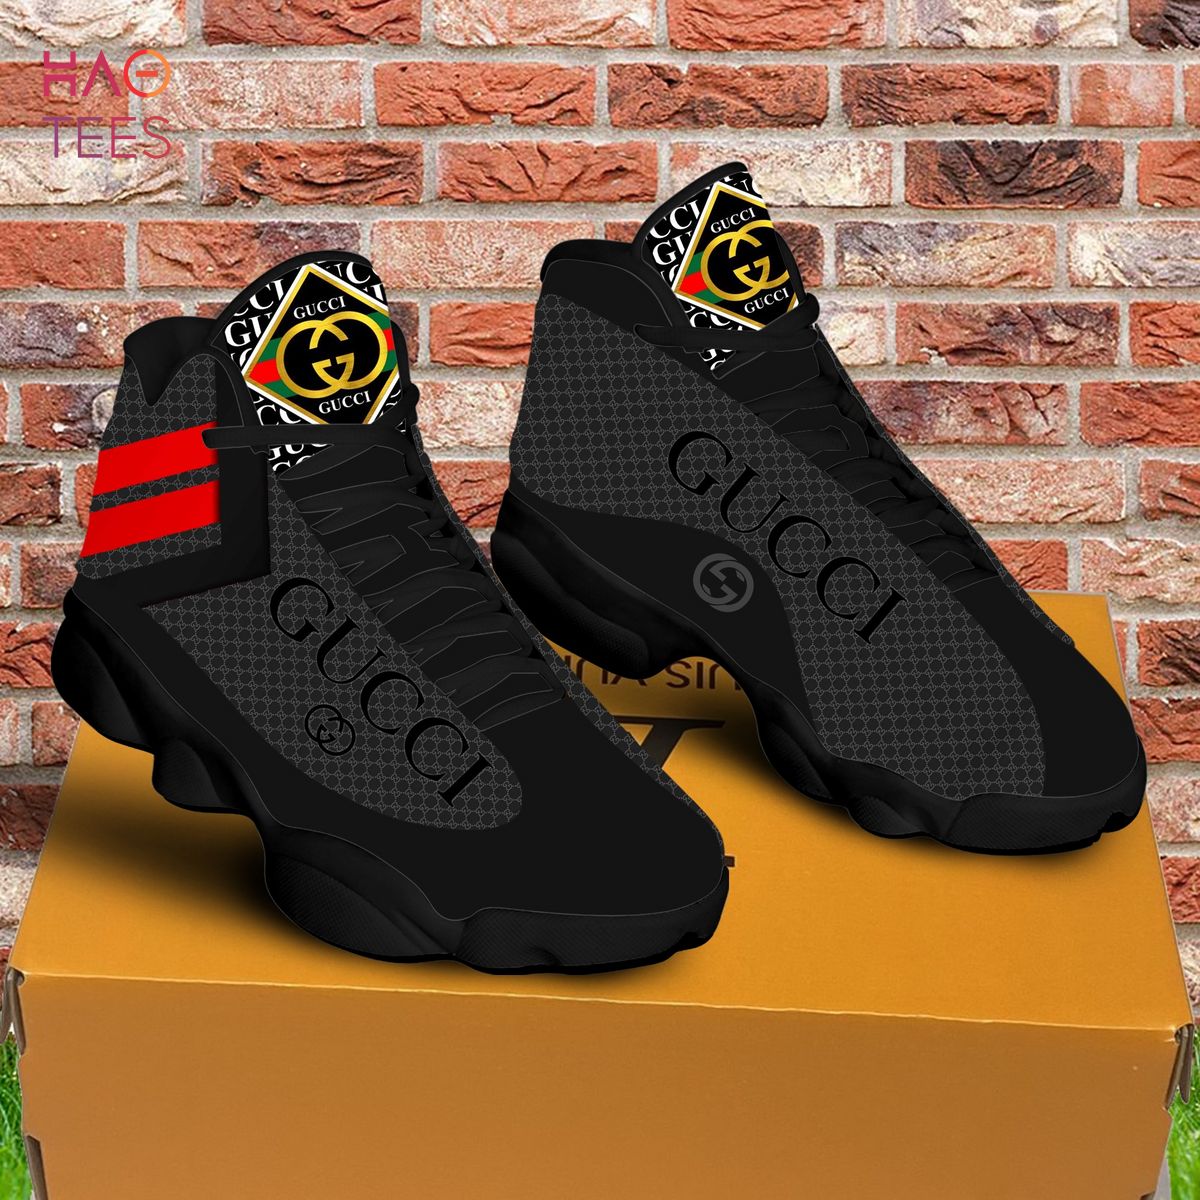 Gucci black white air jordan 13 sneakers shoes hot 2022 gifts for men women  ht in 2023